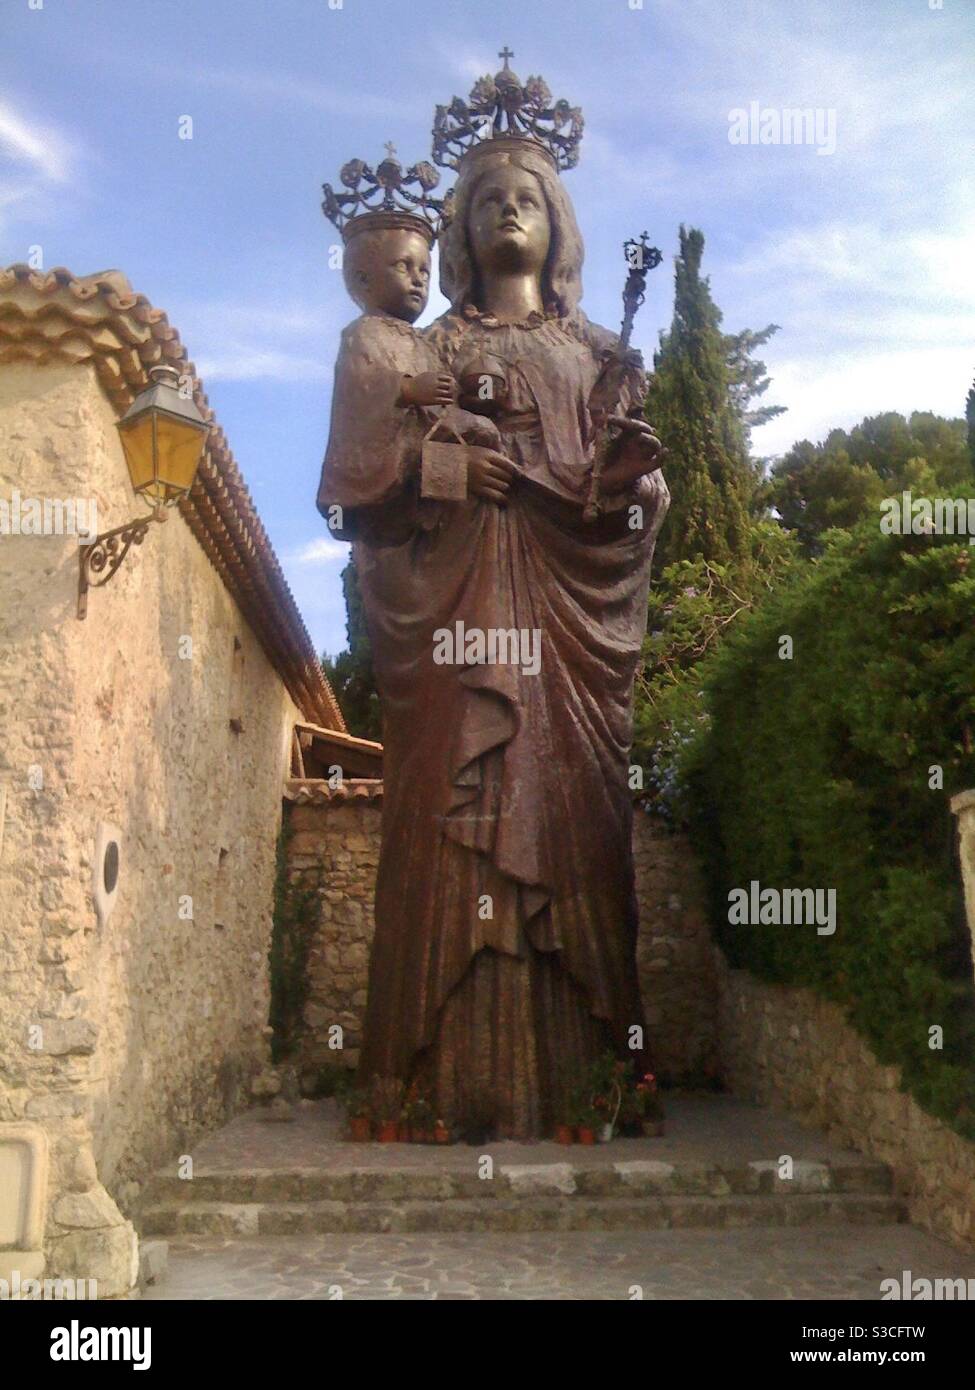 Giant metal statue of the Virgin Mary (Madonna) with baby Jesus by an old house in St Jean Cap Ferrat, Nice, France. Stock Photo